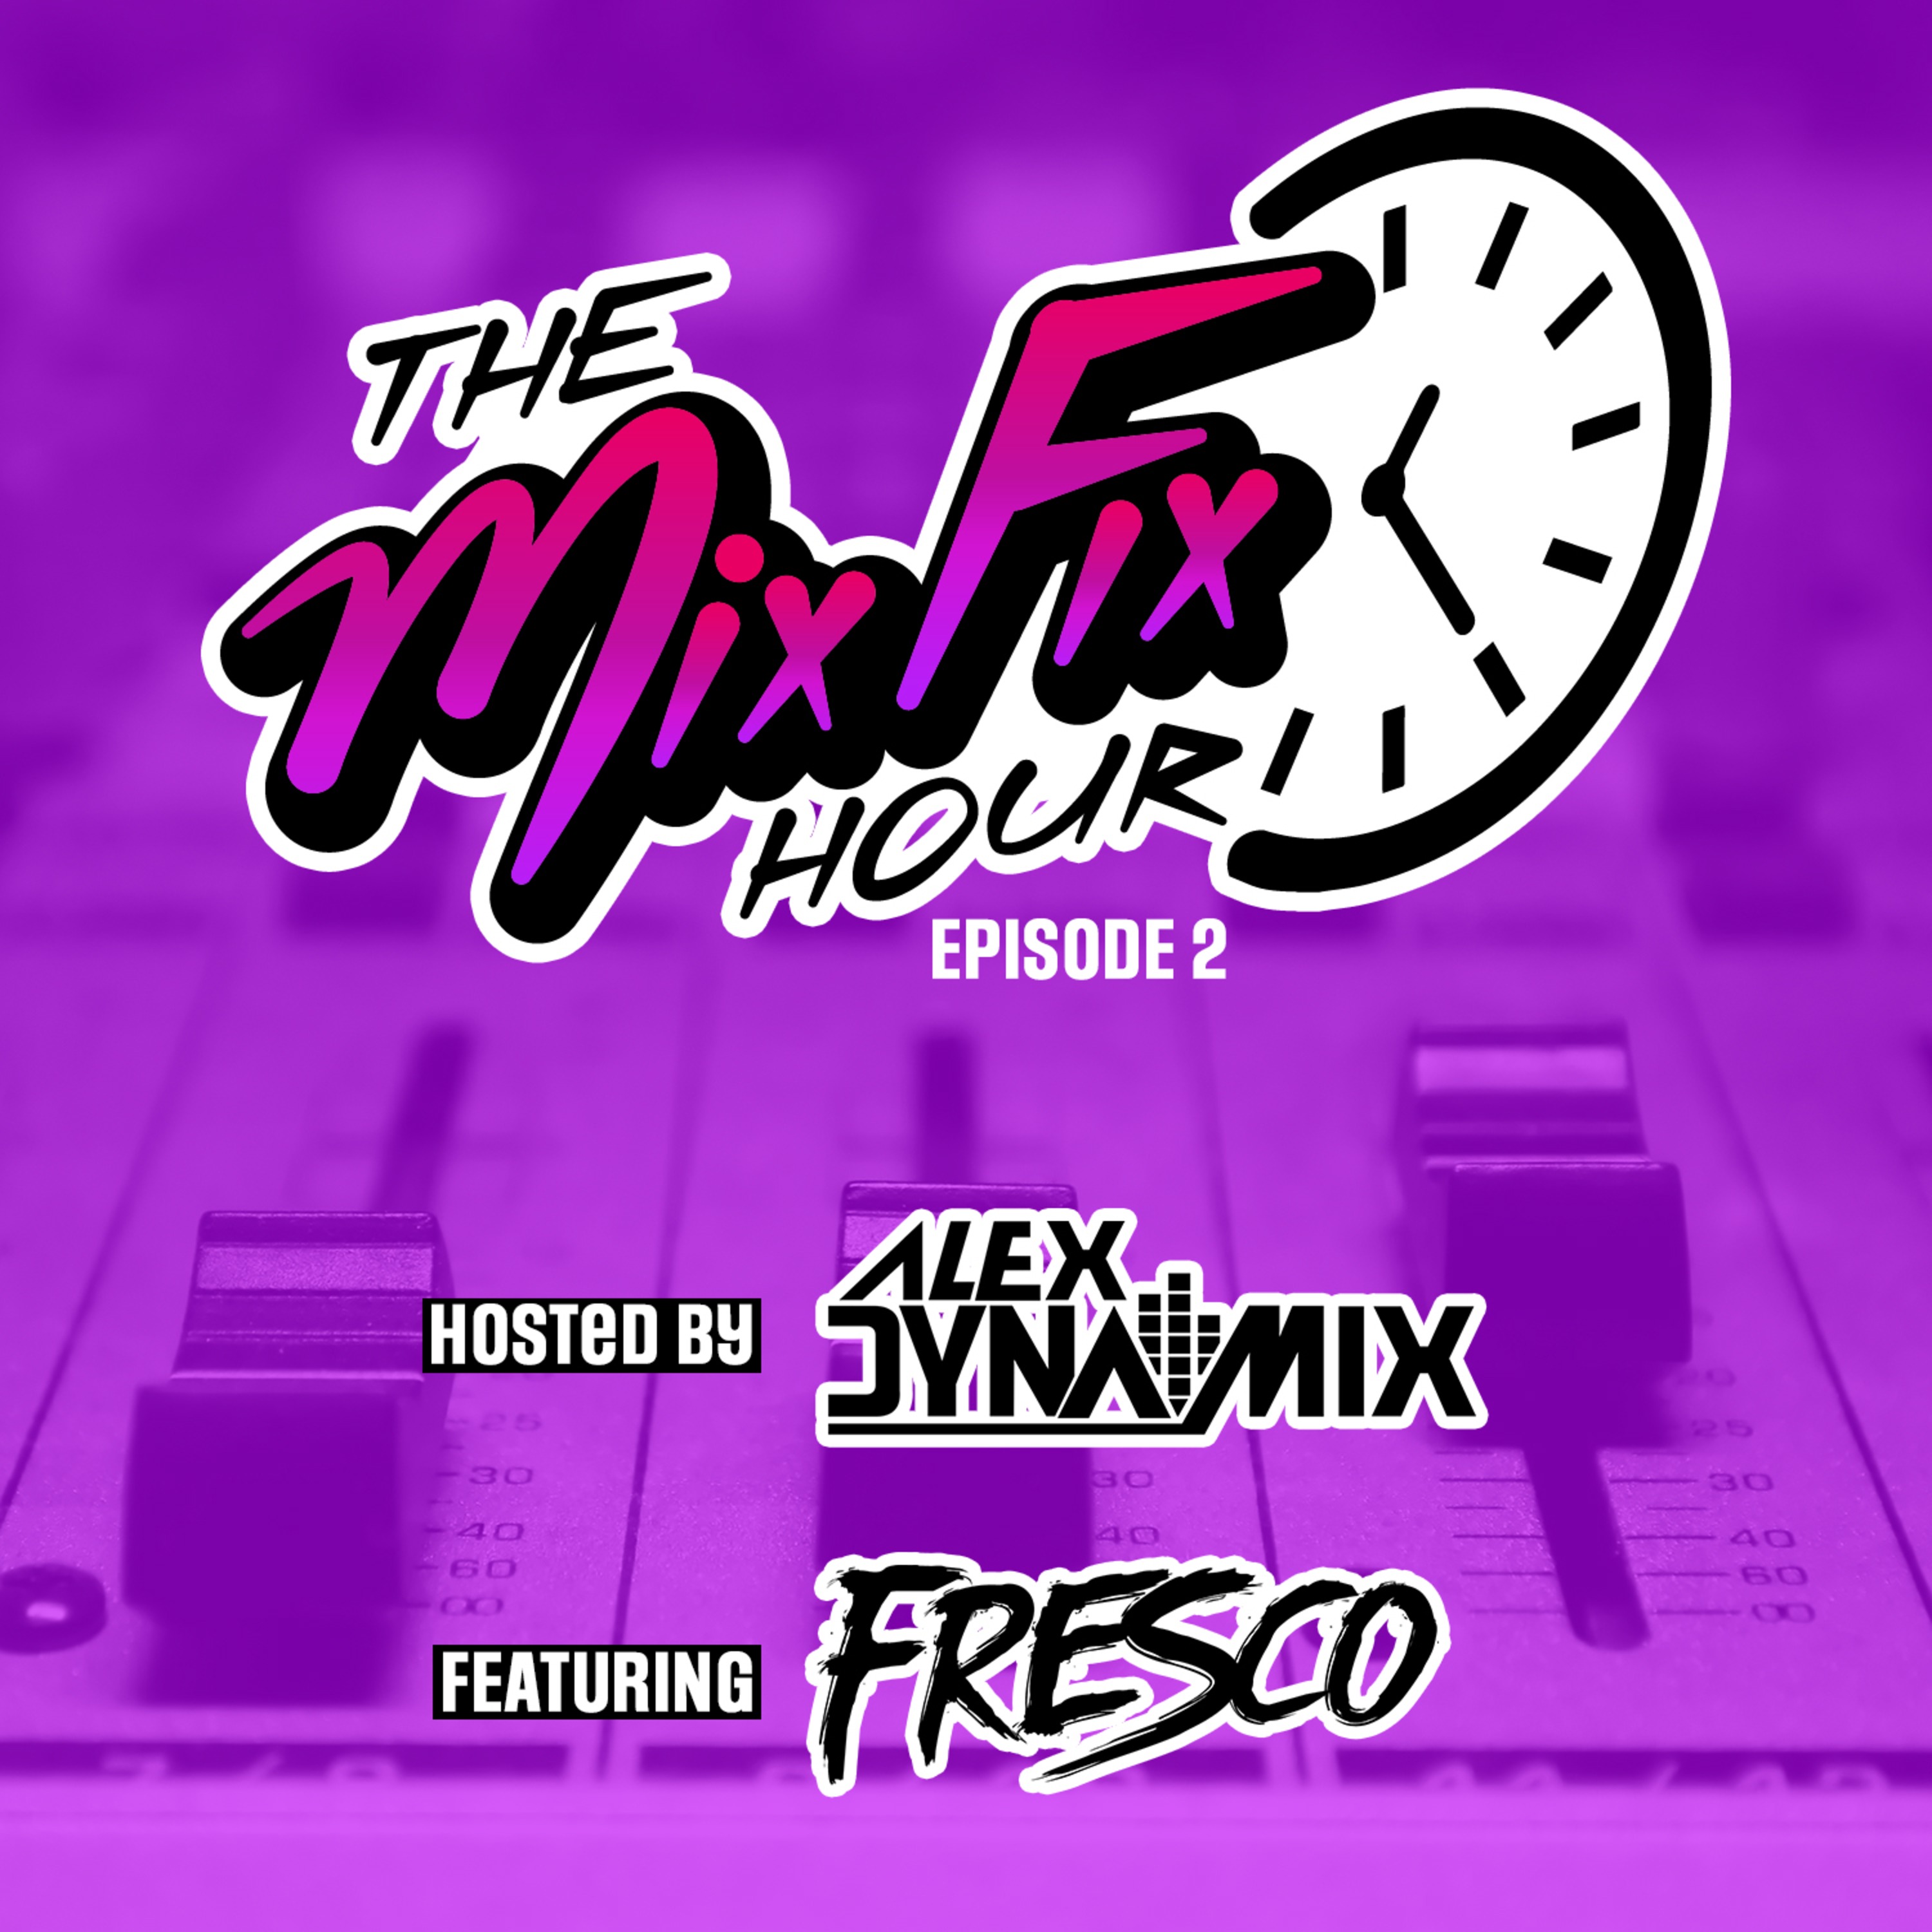 The Mix Fix Hour Hosted By Alex Dynamix Episode 2 Feat Fresco The